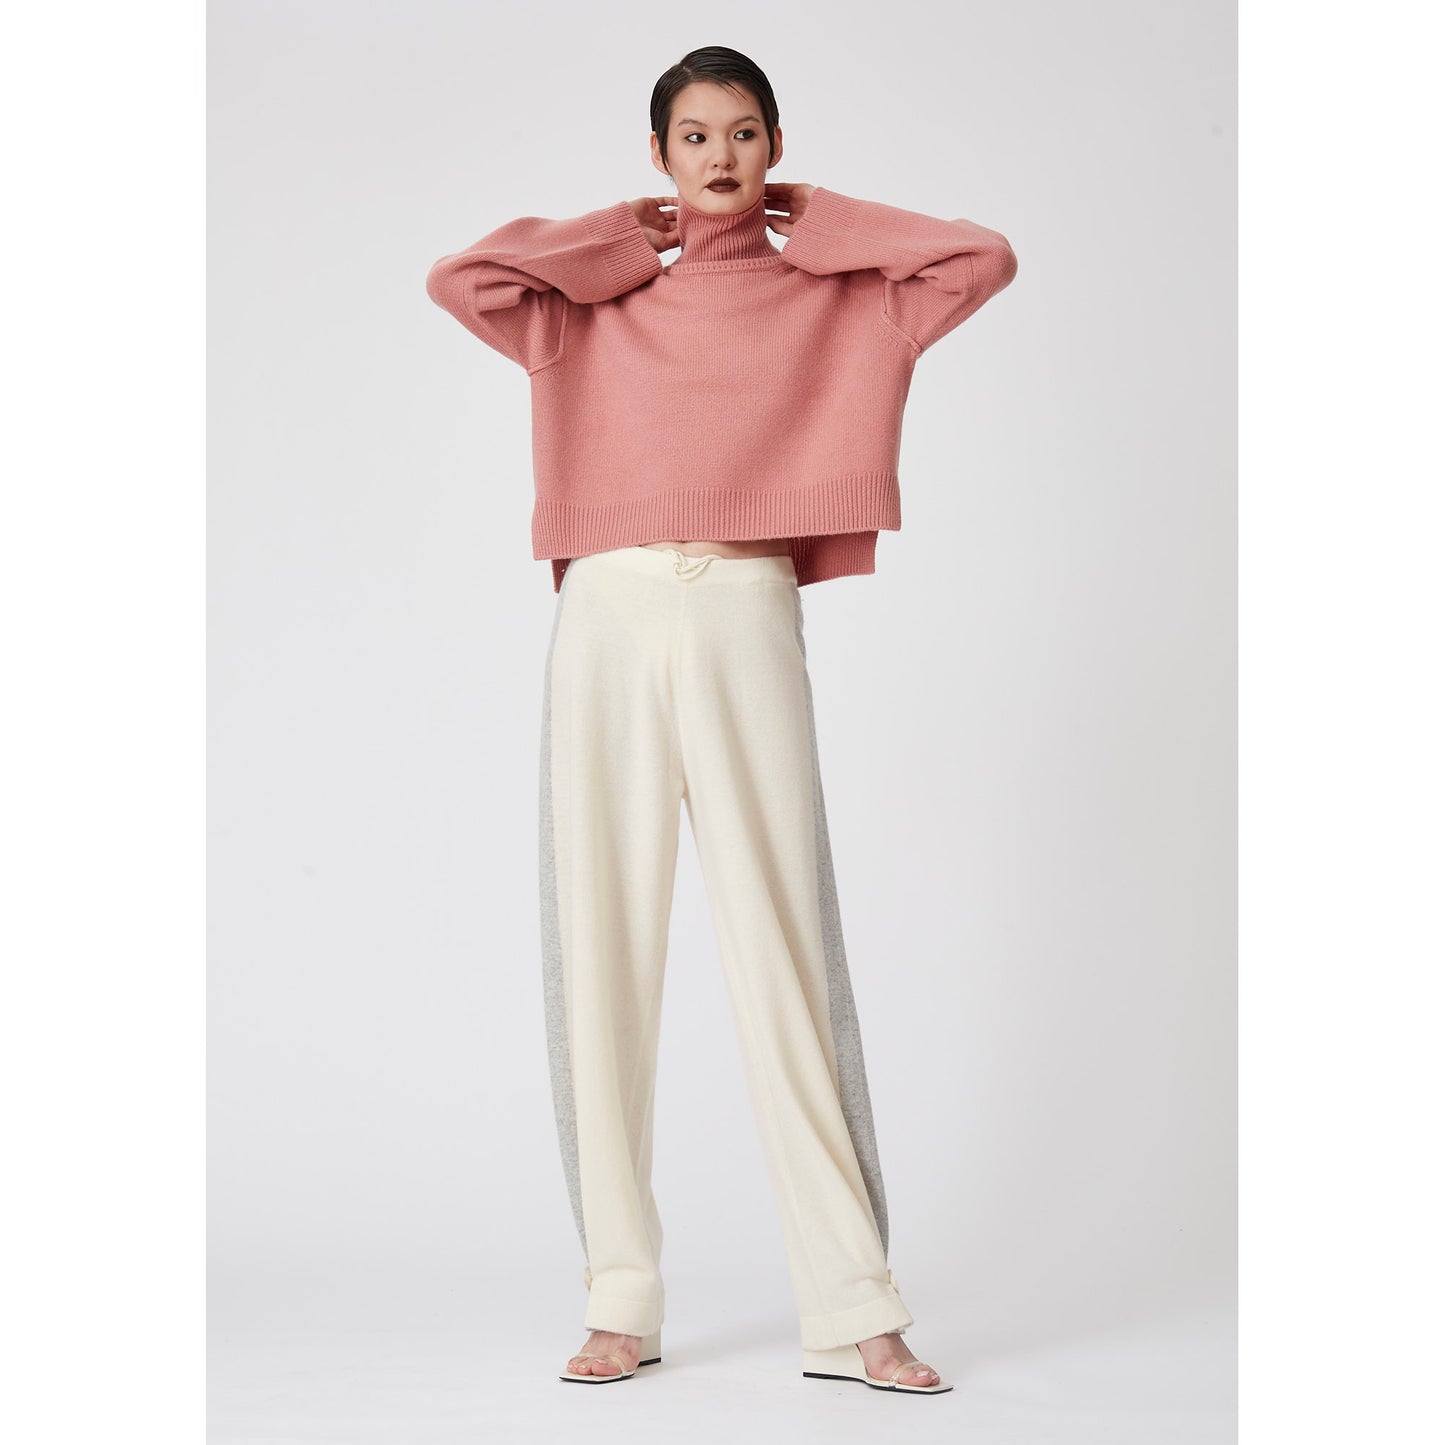 Cropped Roll Neck cashmere Jumper salmon pink / 5629/5674